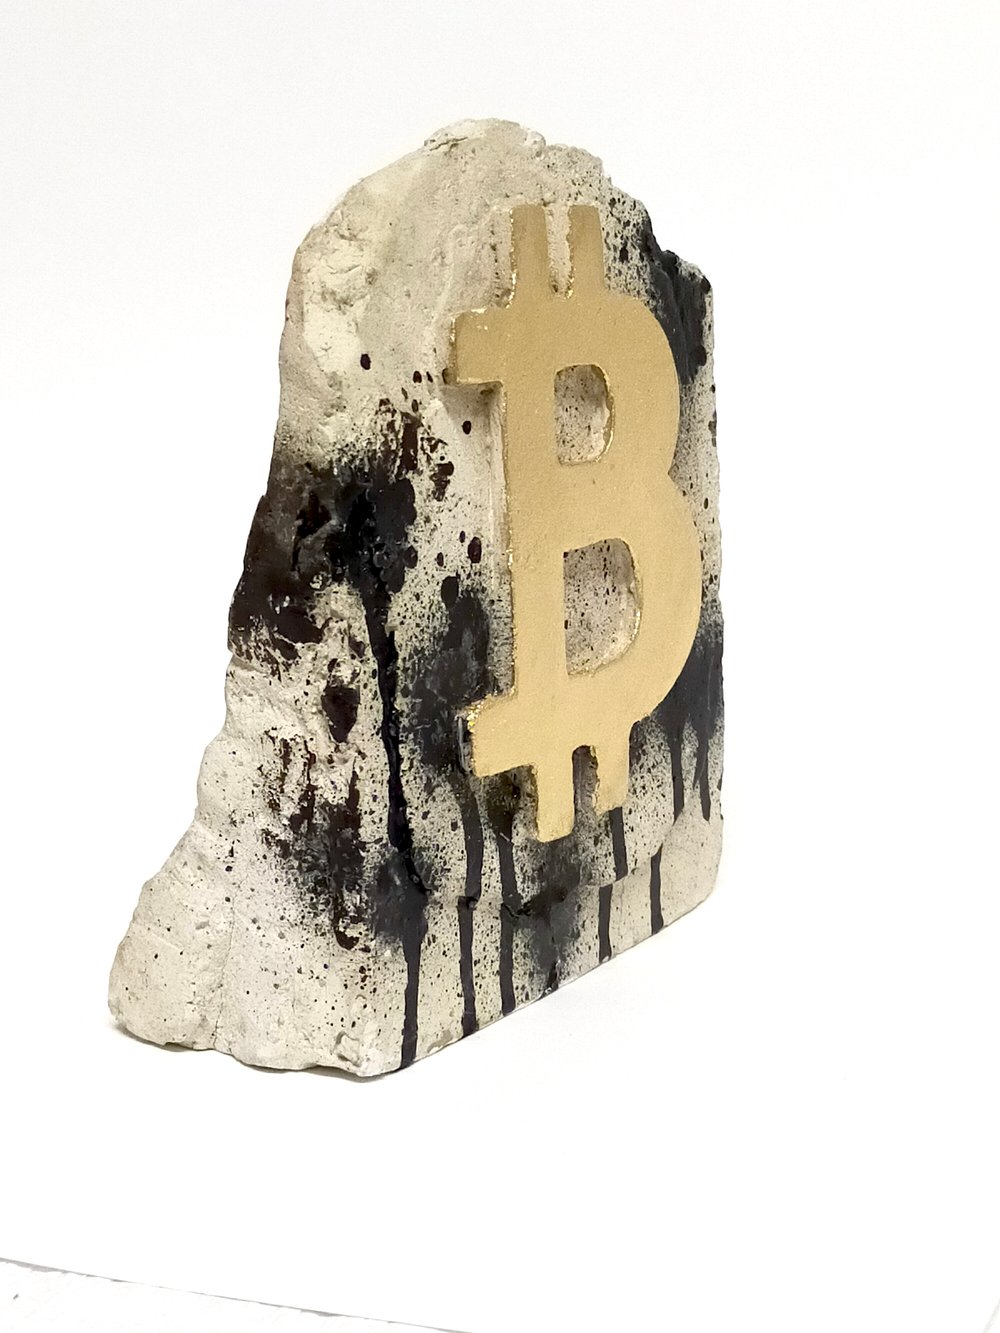 BITCOIN TROPHY (4) ORIGINAL & SIGNED BY ARTIST.